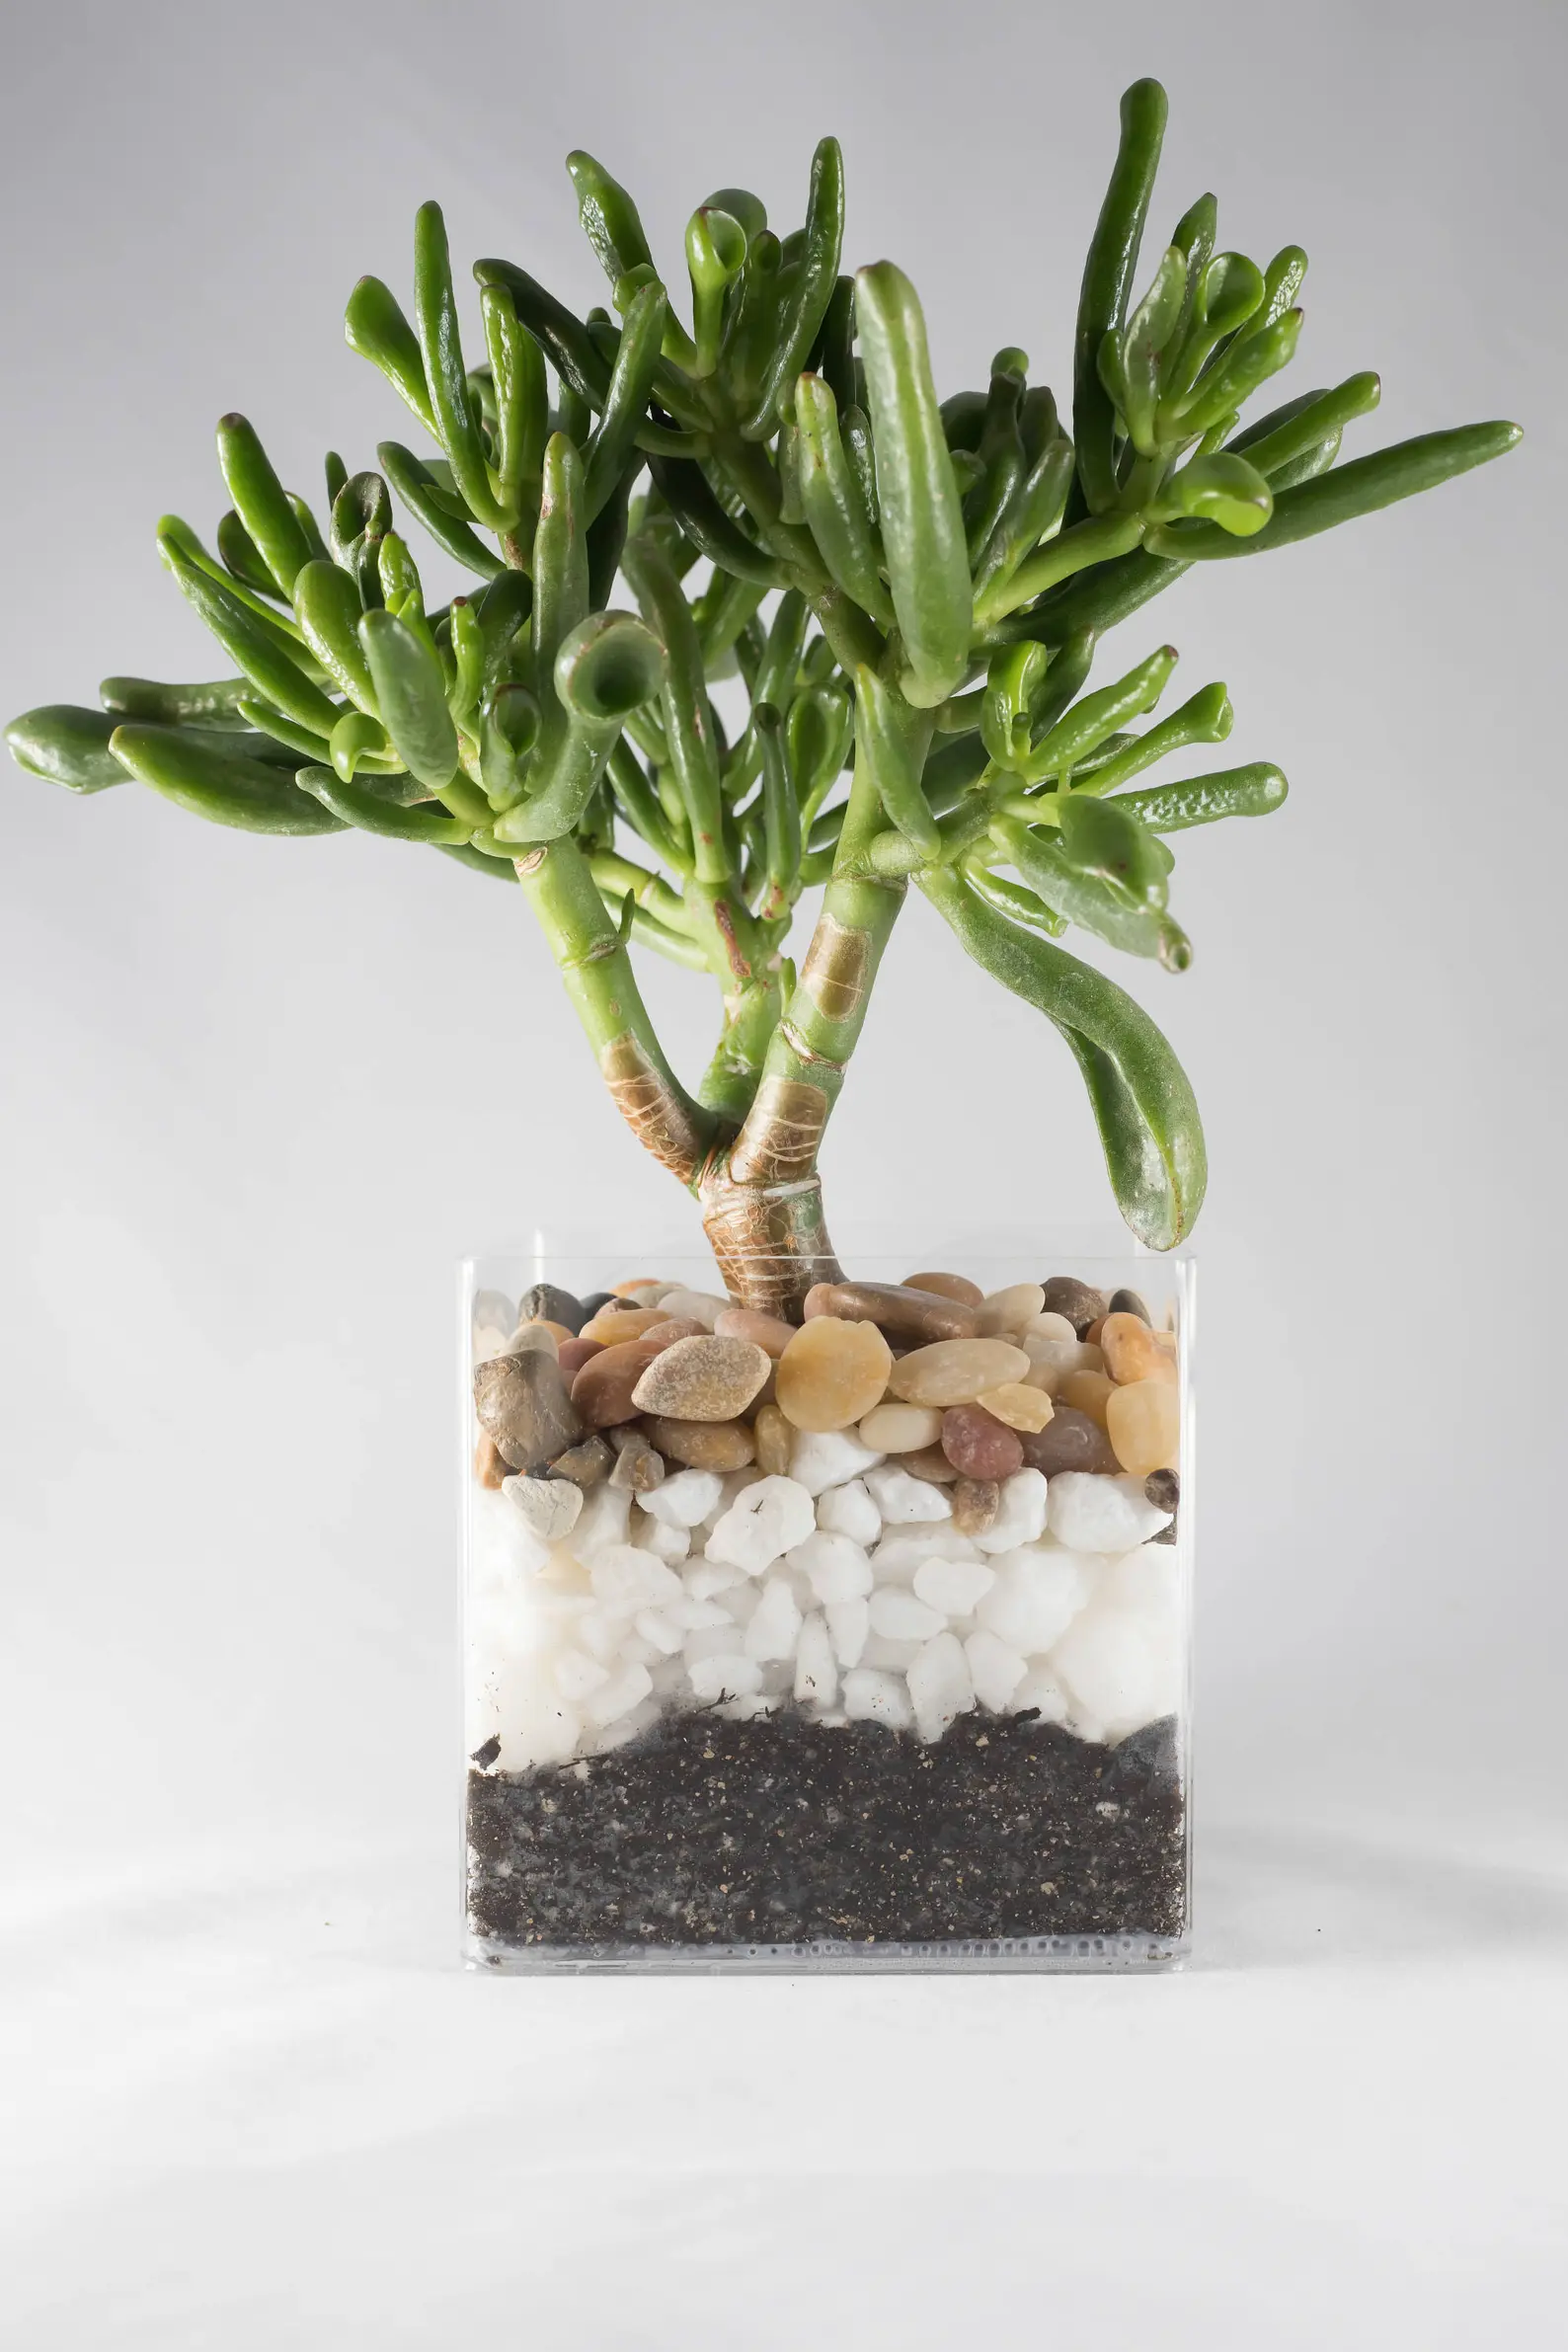 Suction Cup Window Planter Cubed